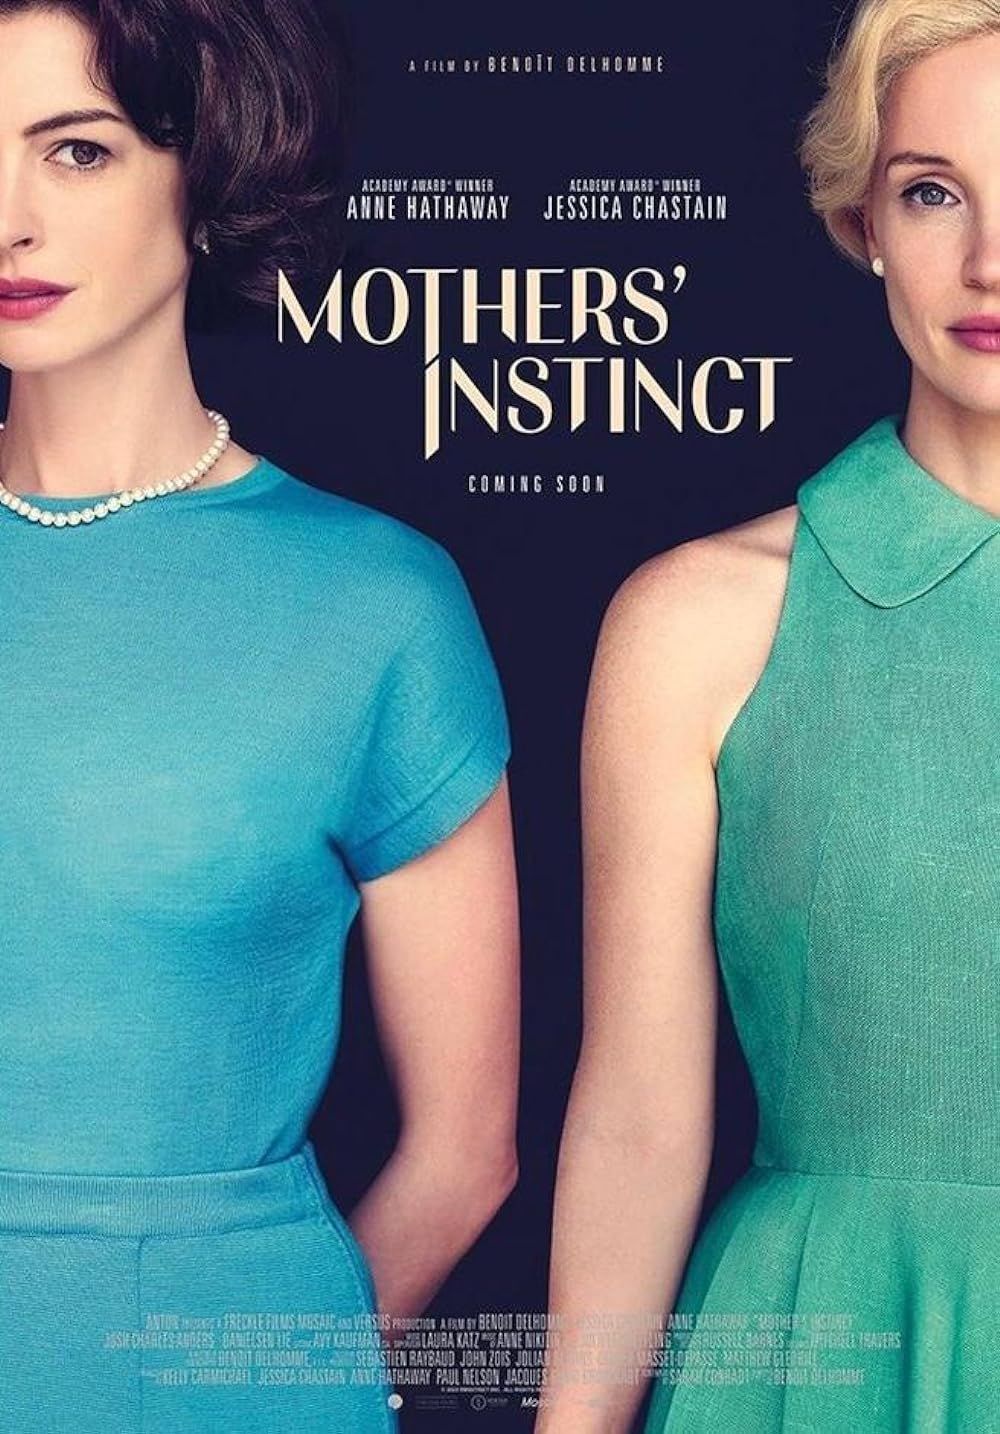 Mothers Instinct Poster of Anne Hathaway and Jessica Chastain